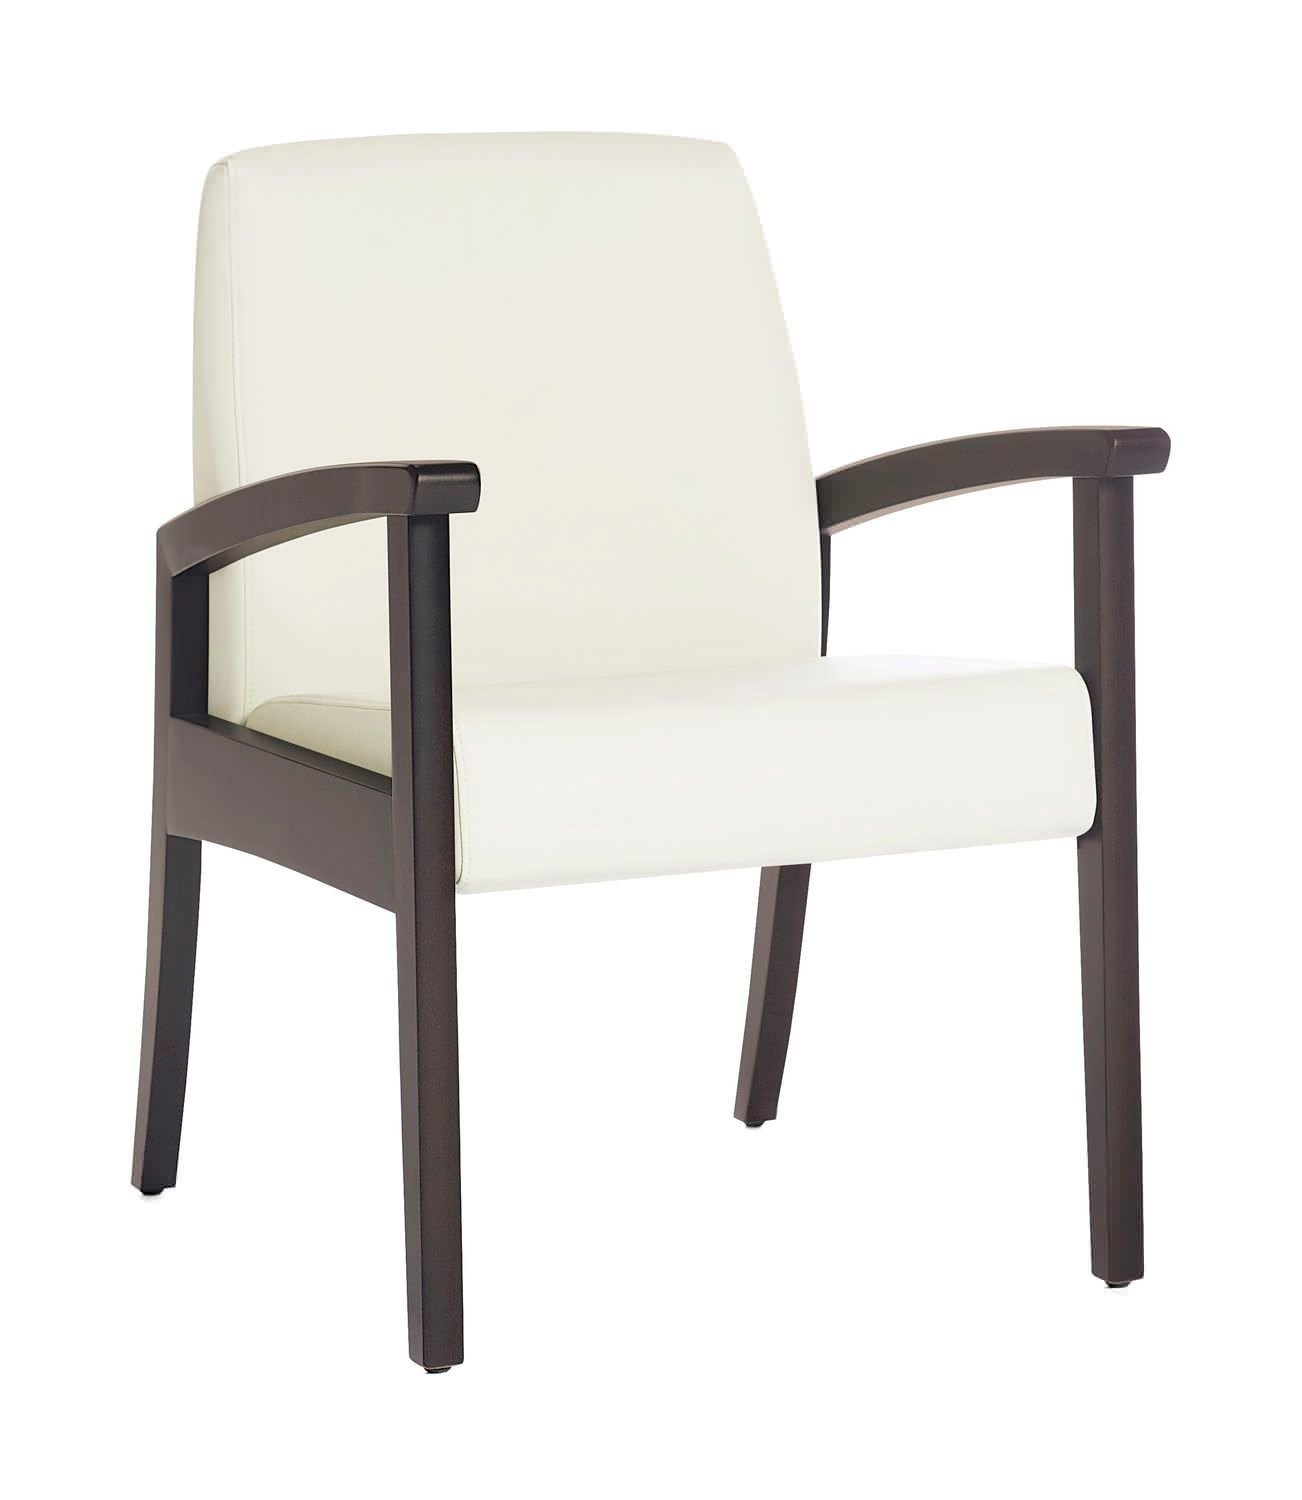 Chair with armrests Vista Stance Healthcare